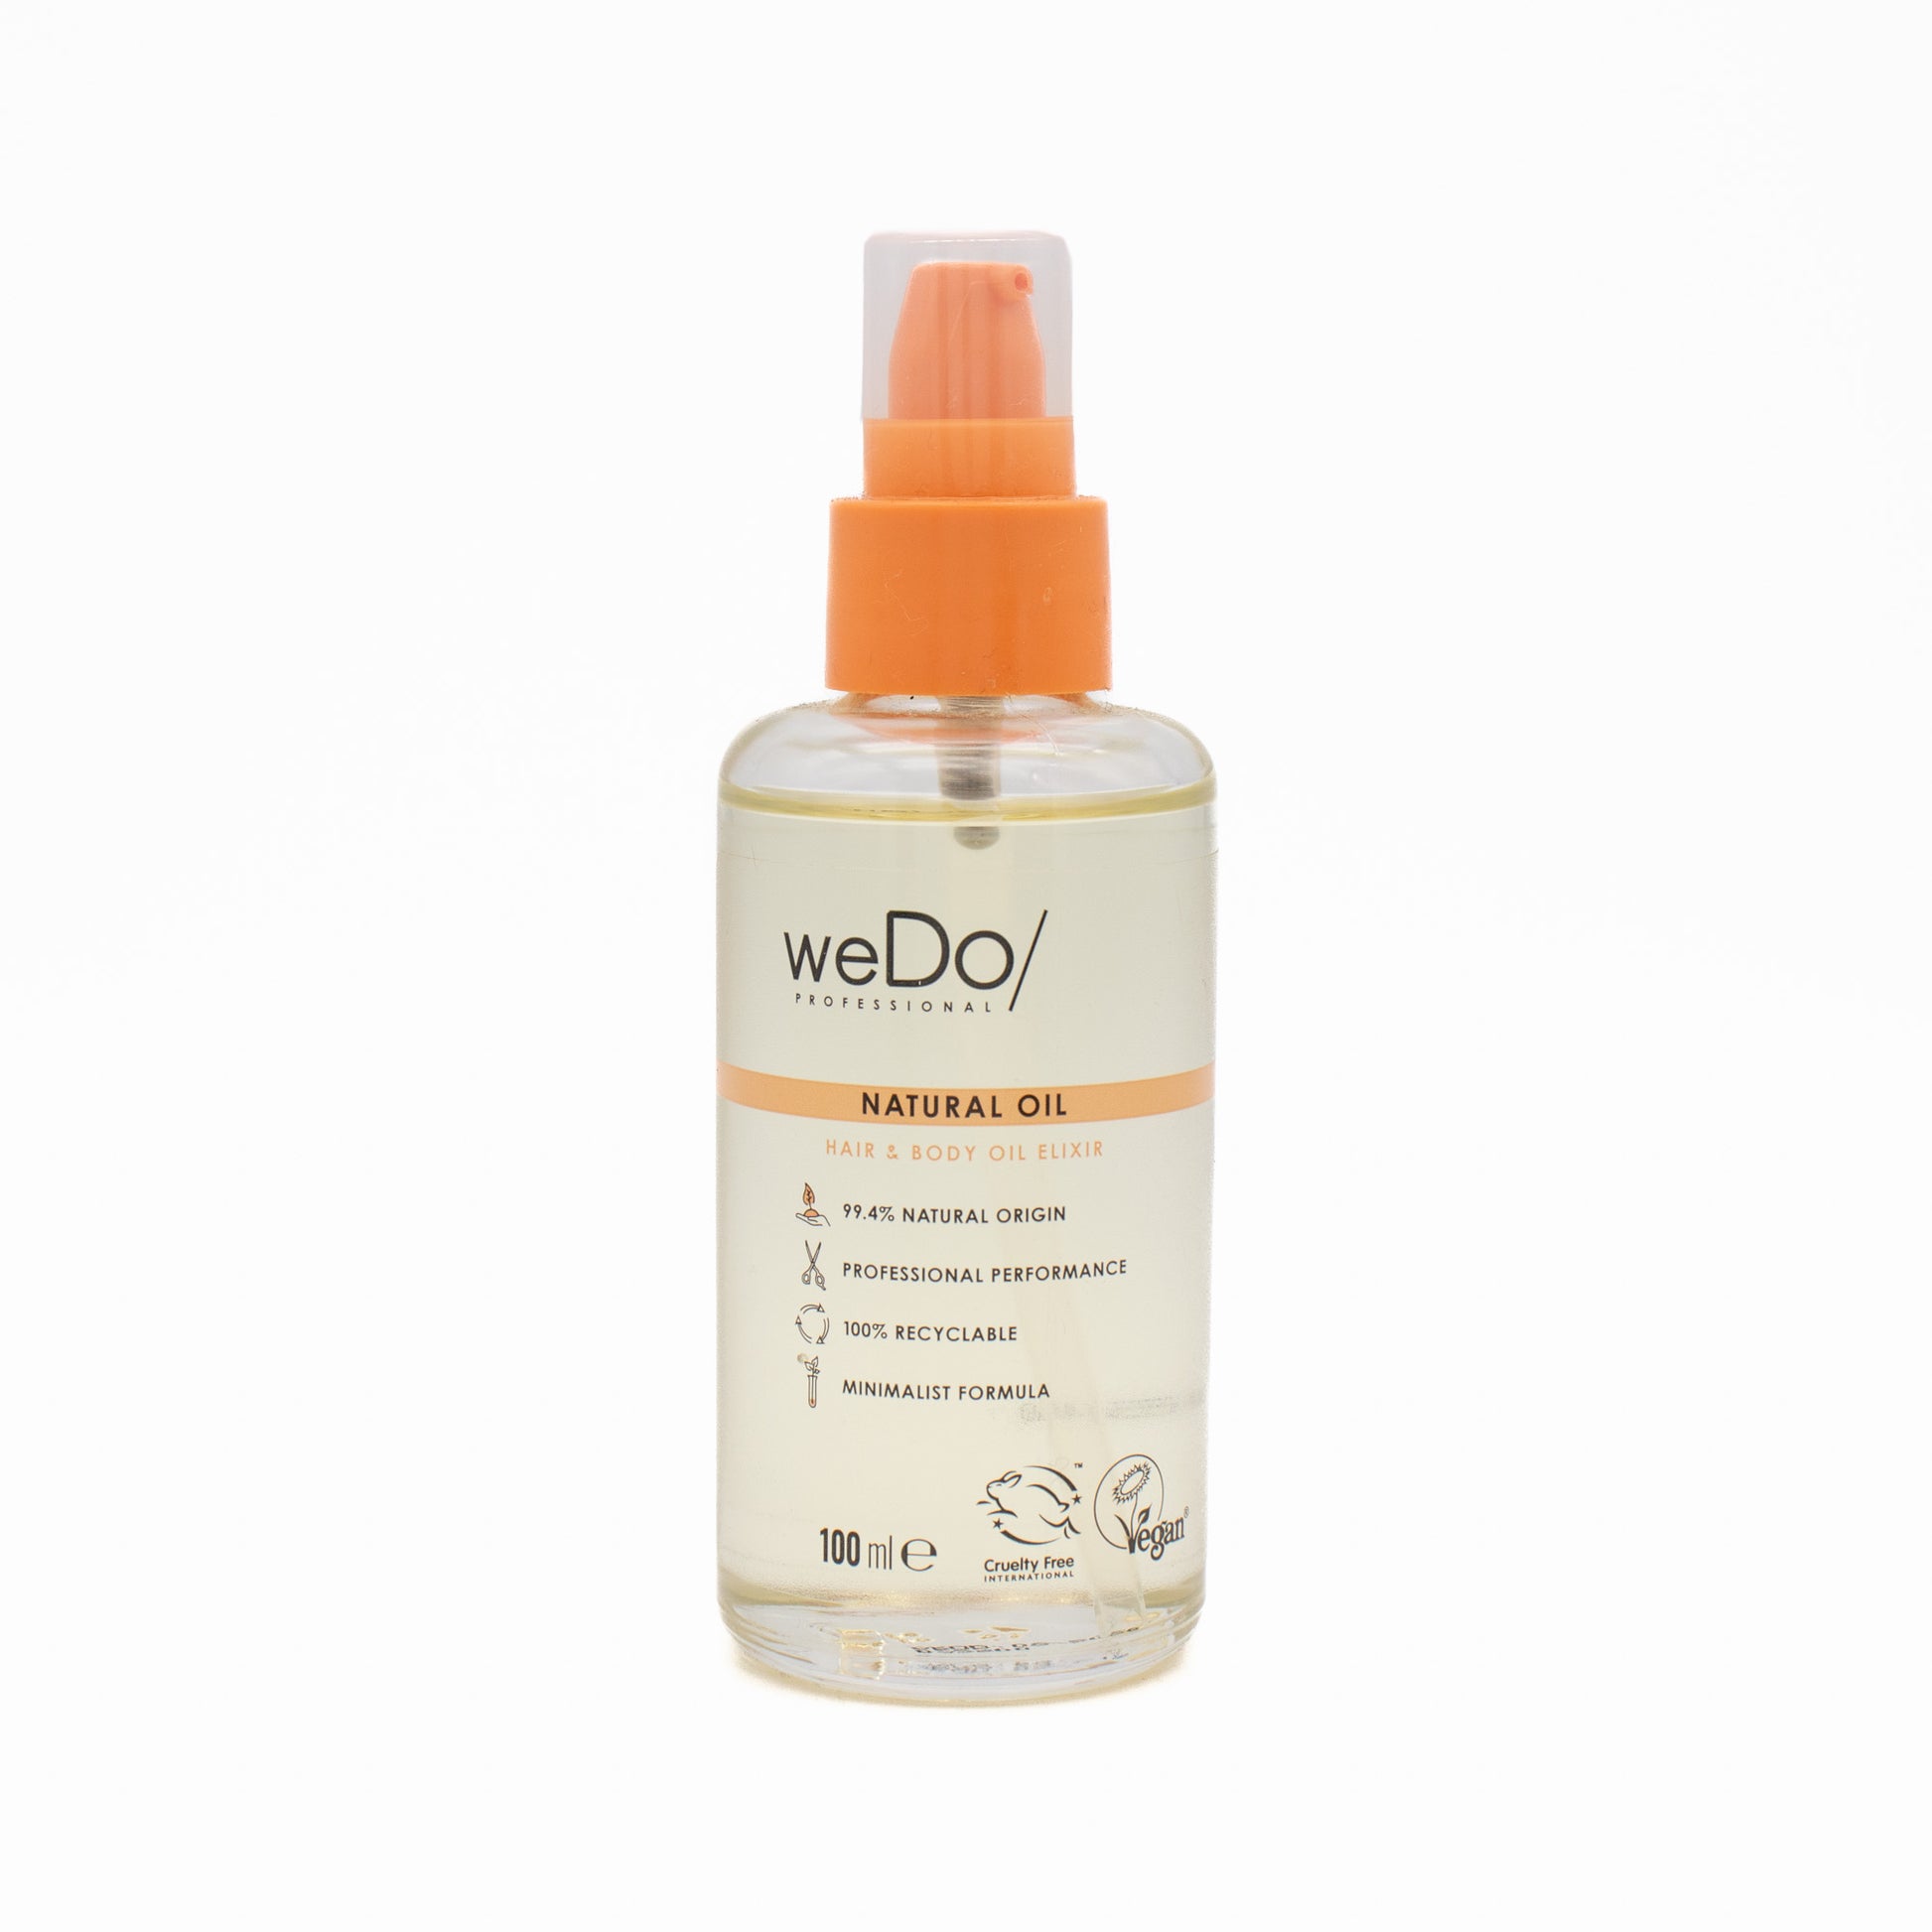 weDo/ Natural Professional Hair and Body Oil 100ml - Missing Box - This is Beauty UK